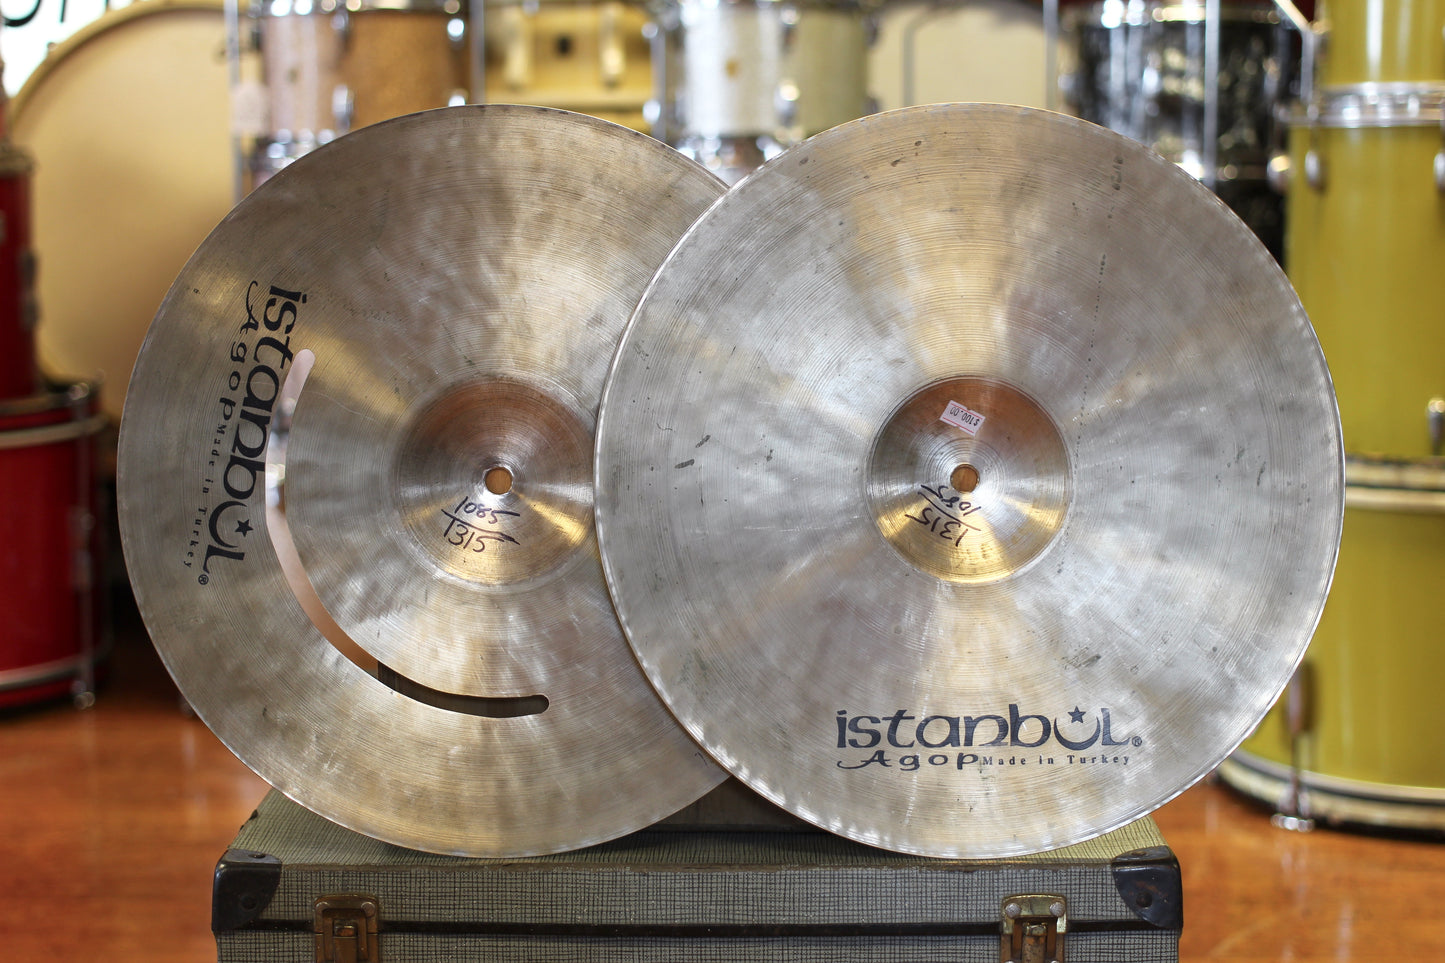 Used Istanbul Agop 15" Early Xist Hi-Hat Cymbals 1085/1315g